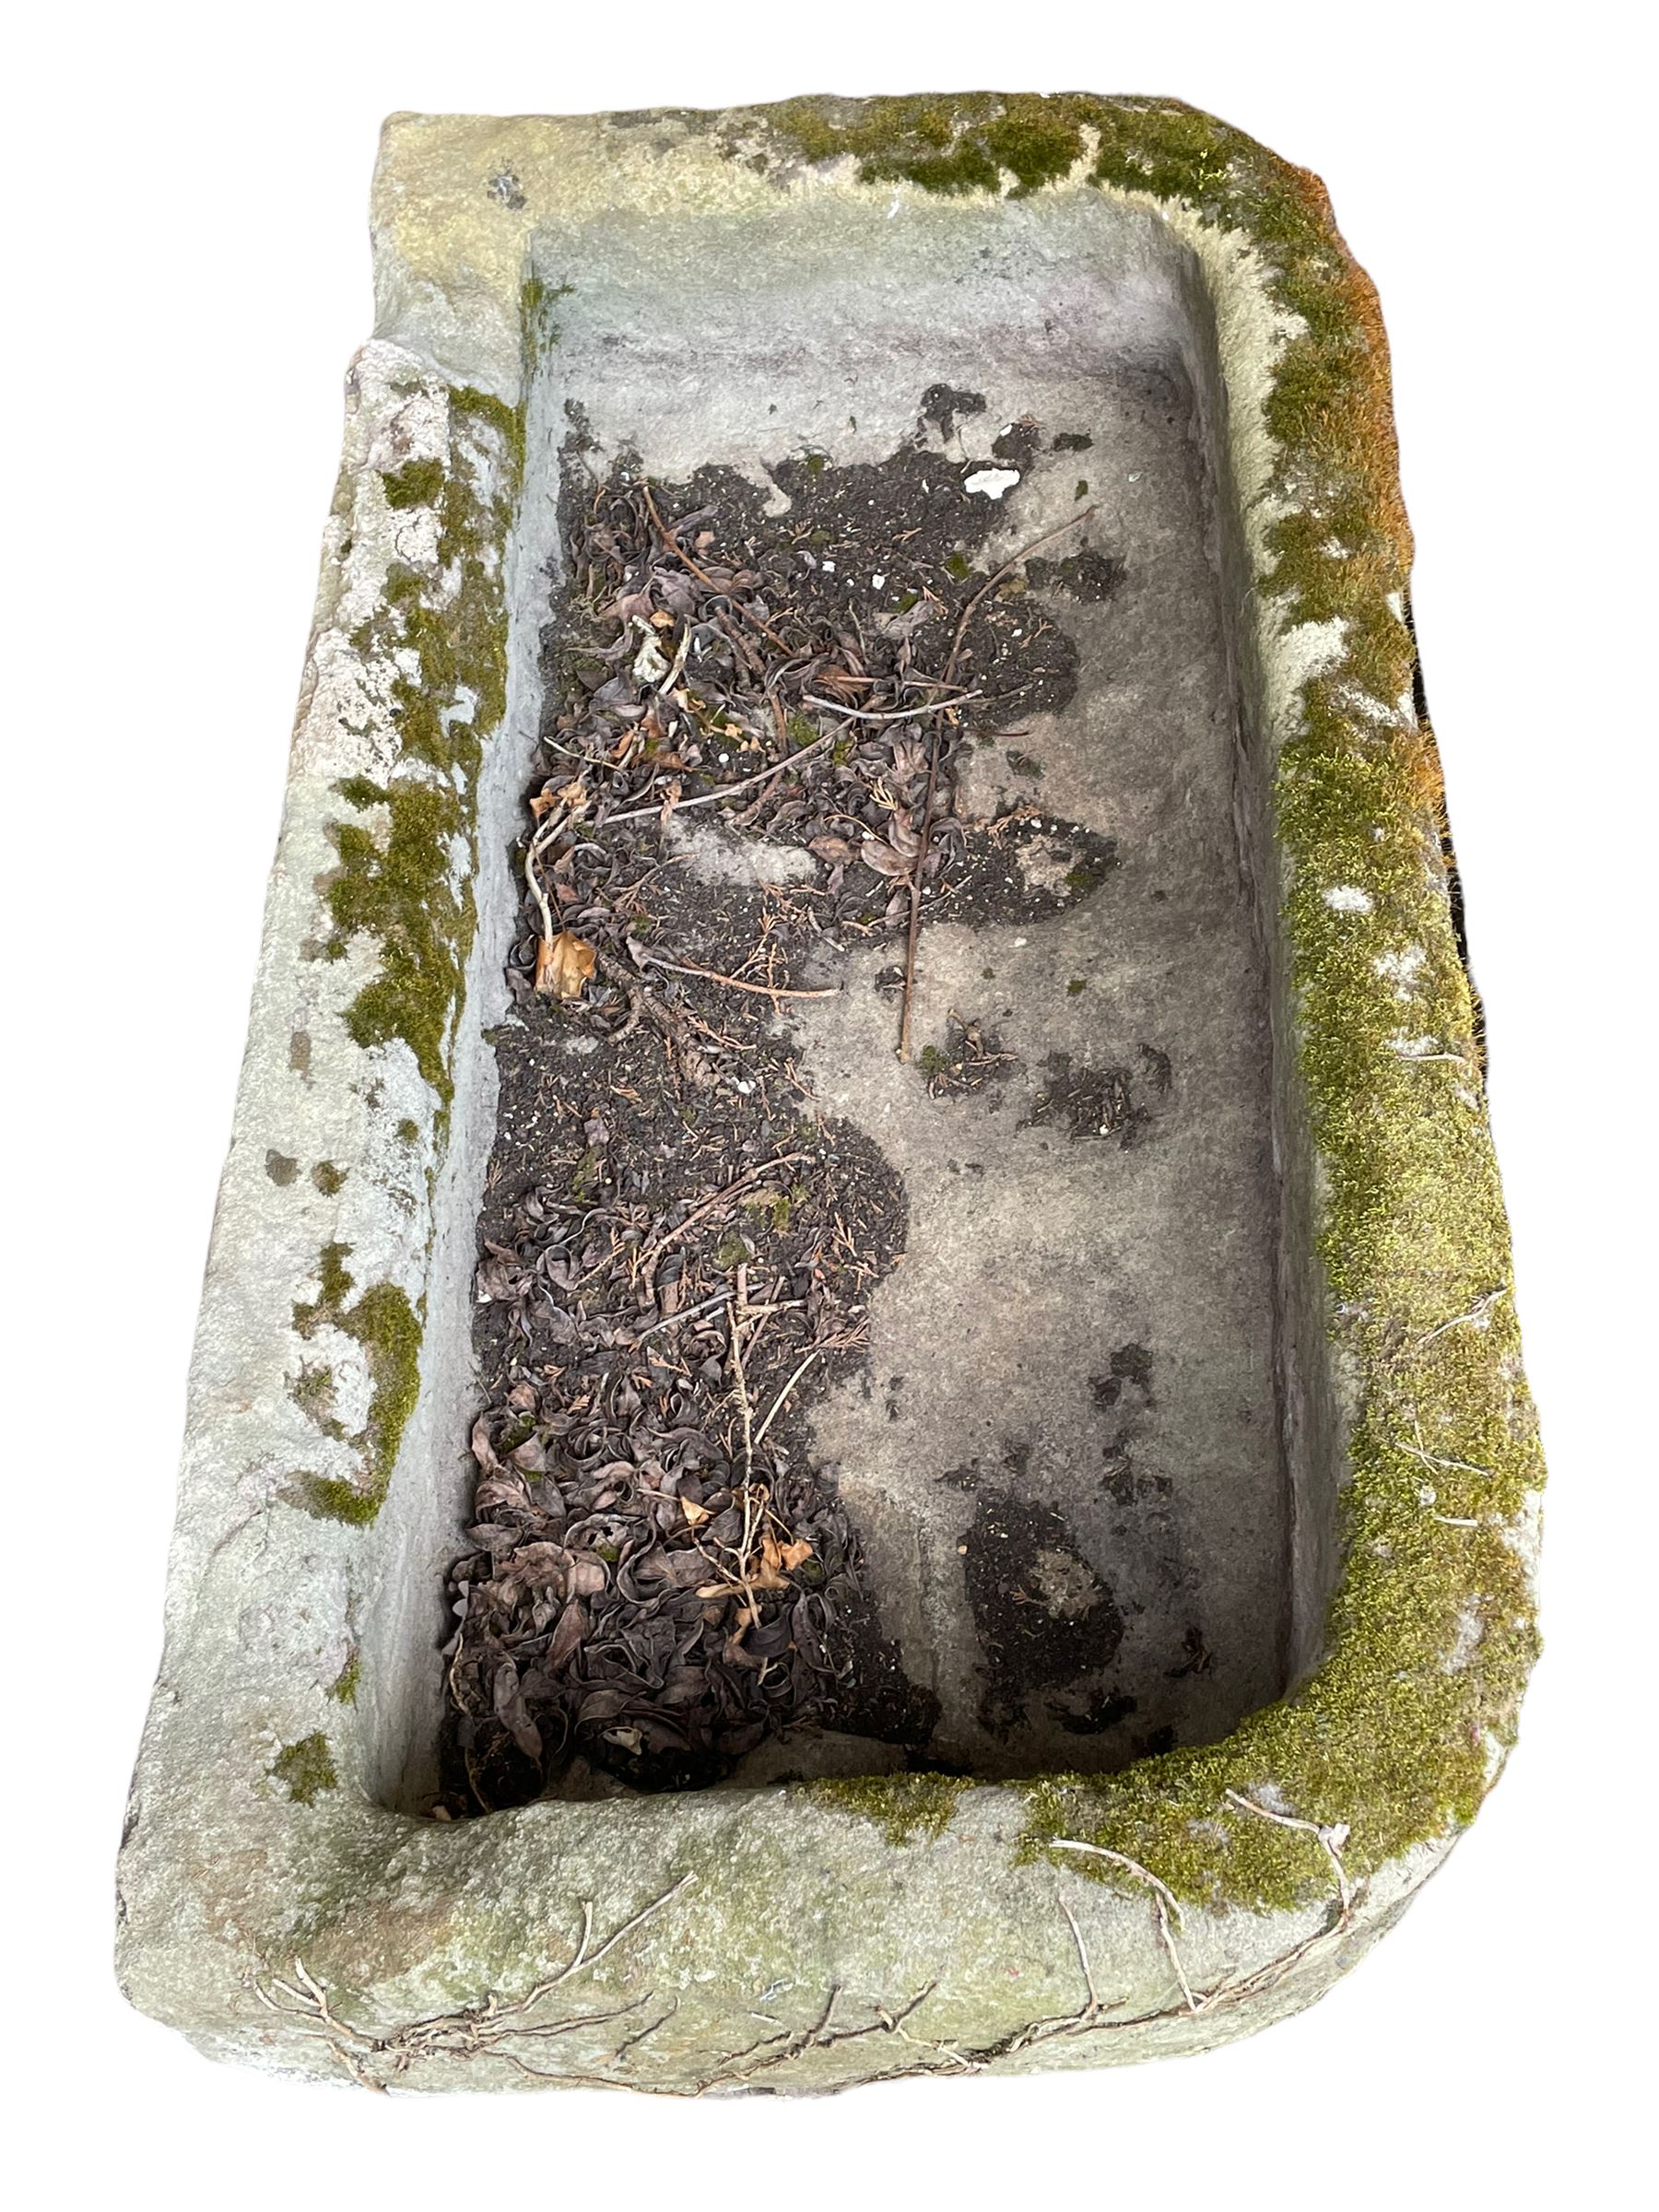 19th century tooled and weathered stone trough or planter - Image 2 of 2